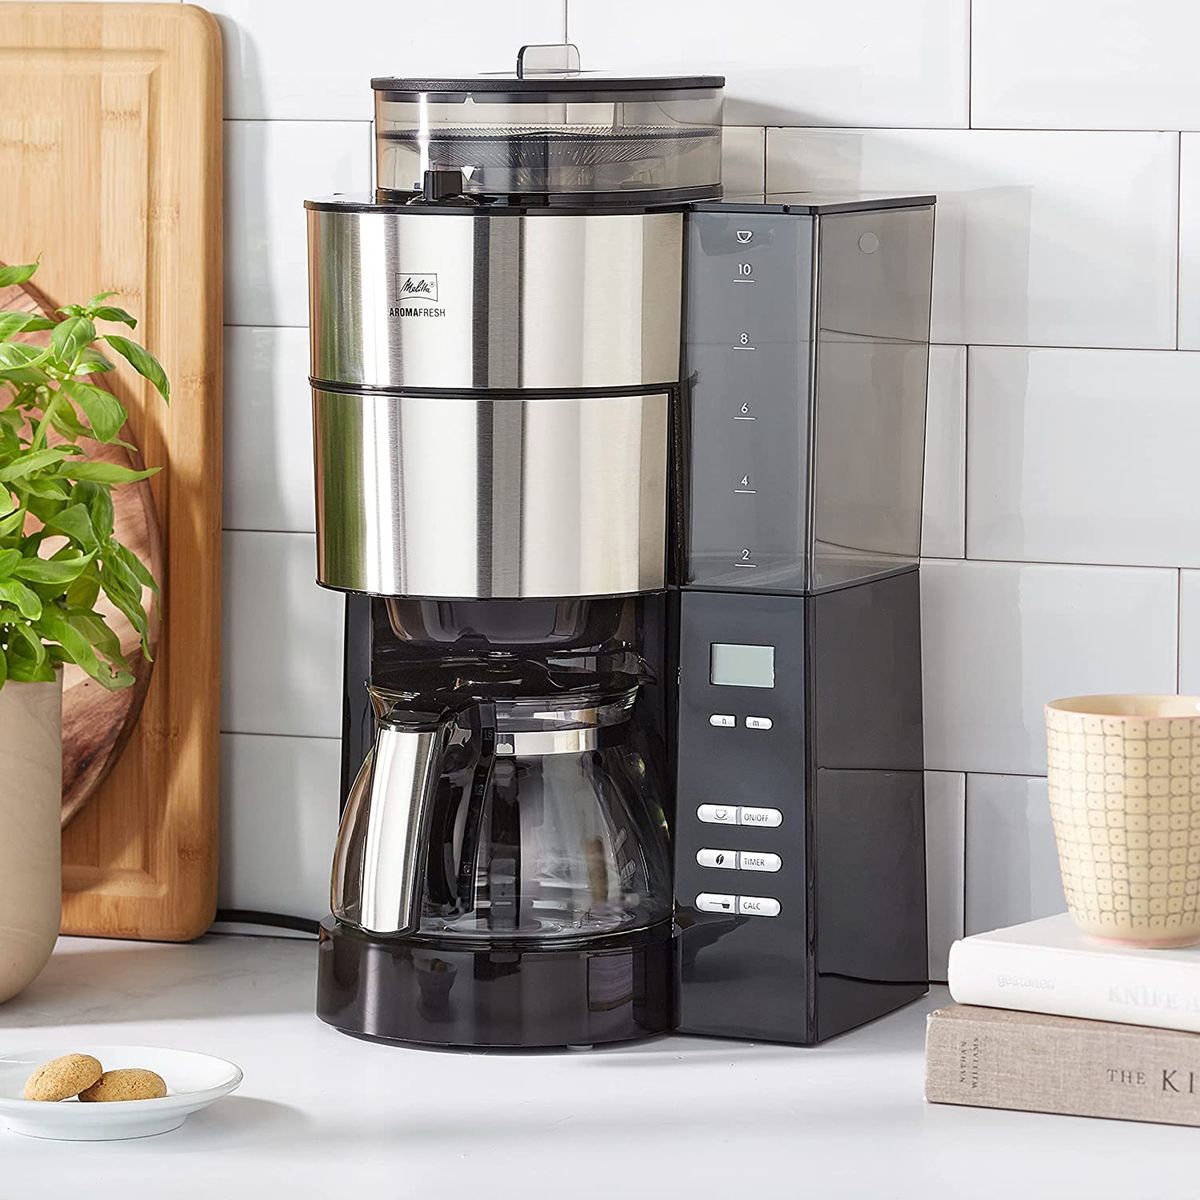 Best filter coffee machine 2023 tried and tested by our expert team